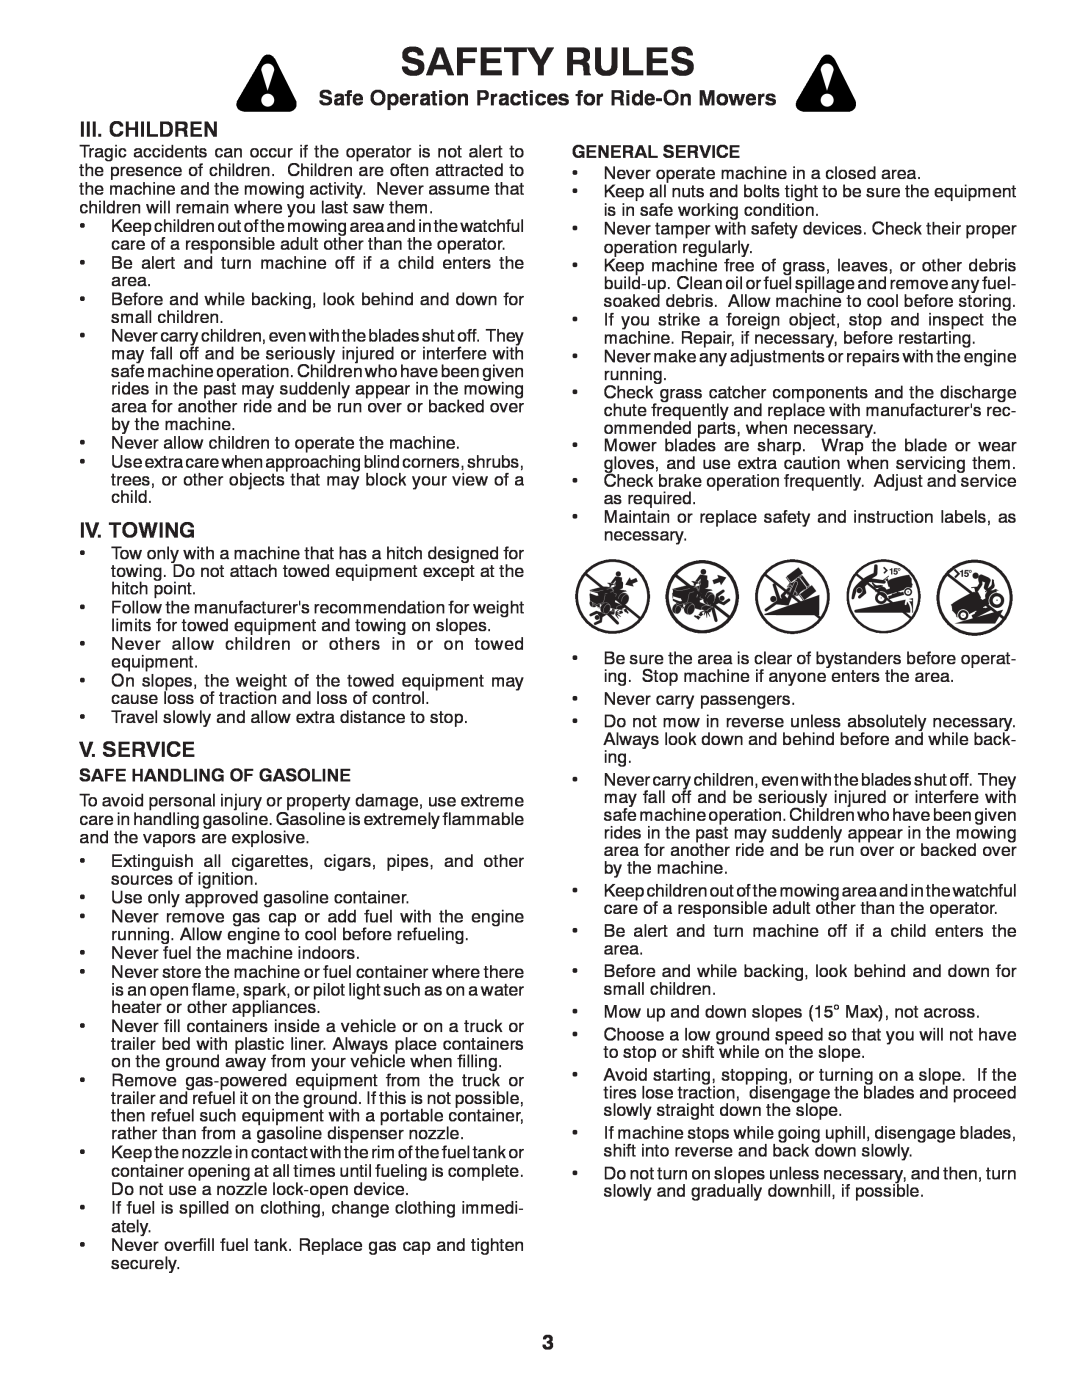 Poulan 34-80, 96042010703 Safety Rules, Safe Operation Practices for Ride-On Mowers, Iii. Children, Iv. Towing, V. Service 